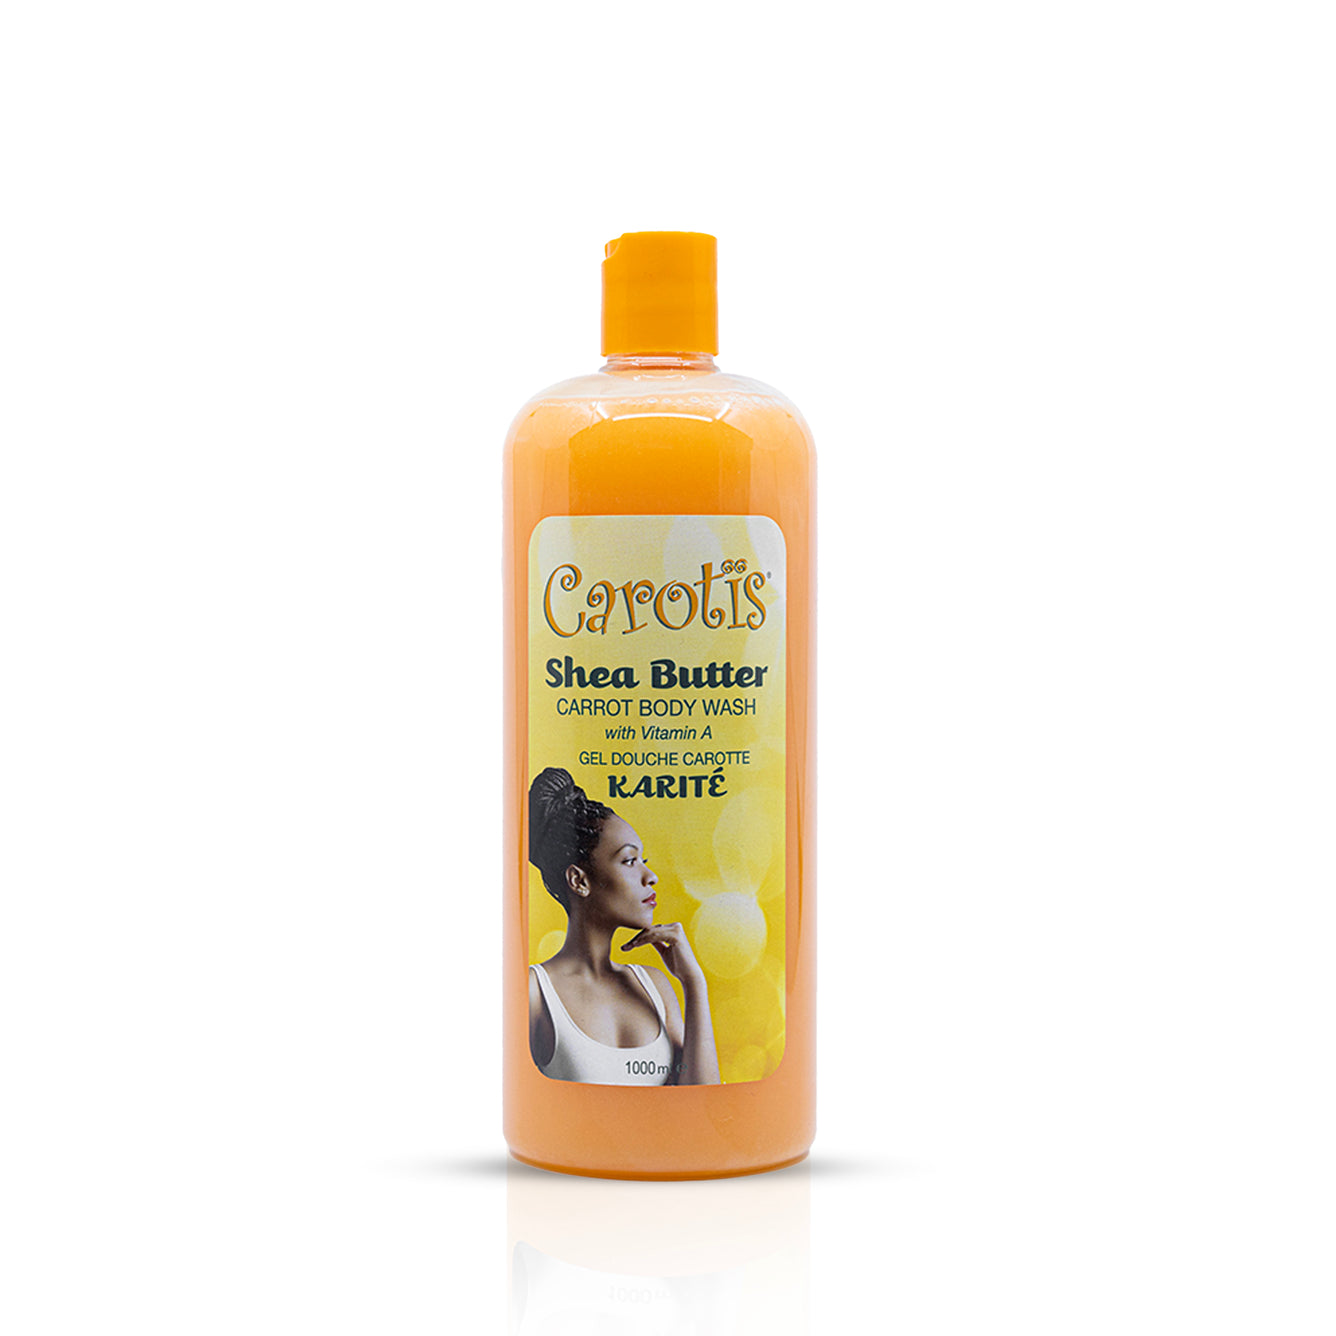 Carotis Shea Butter Carrot Body Wash with Vitamin A - 1000ml / 33.8 oz Carotis - Mitchell Brands - Skin Lightening, Skin Brightening, Fade Dark Spots, Shea Butter, Hair Growth Products